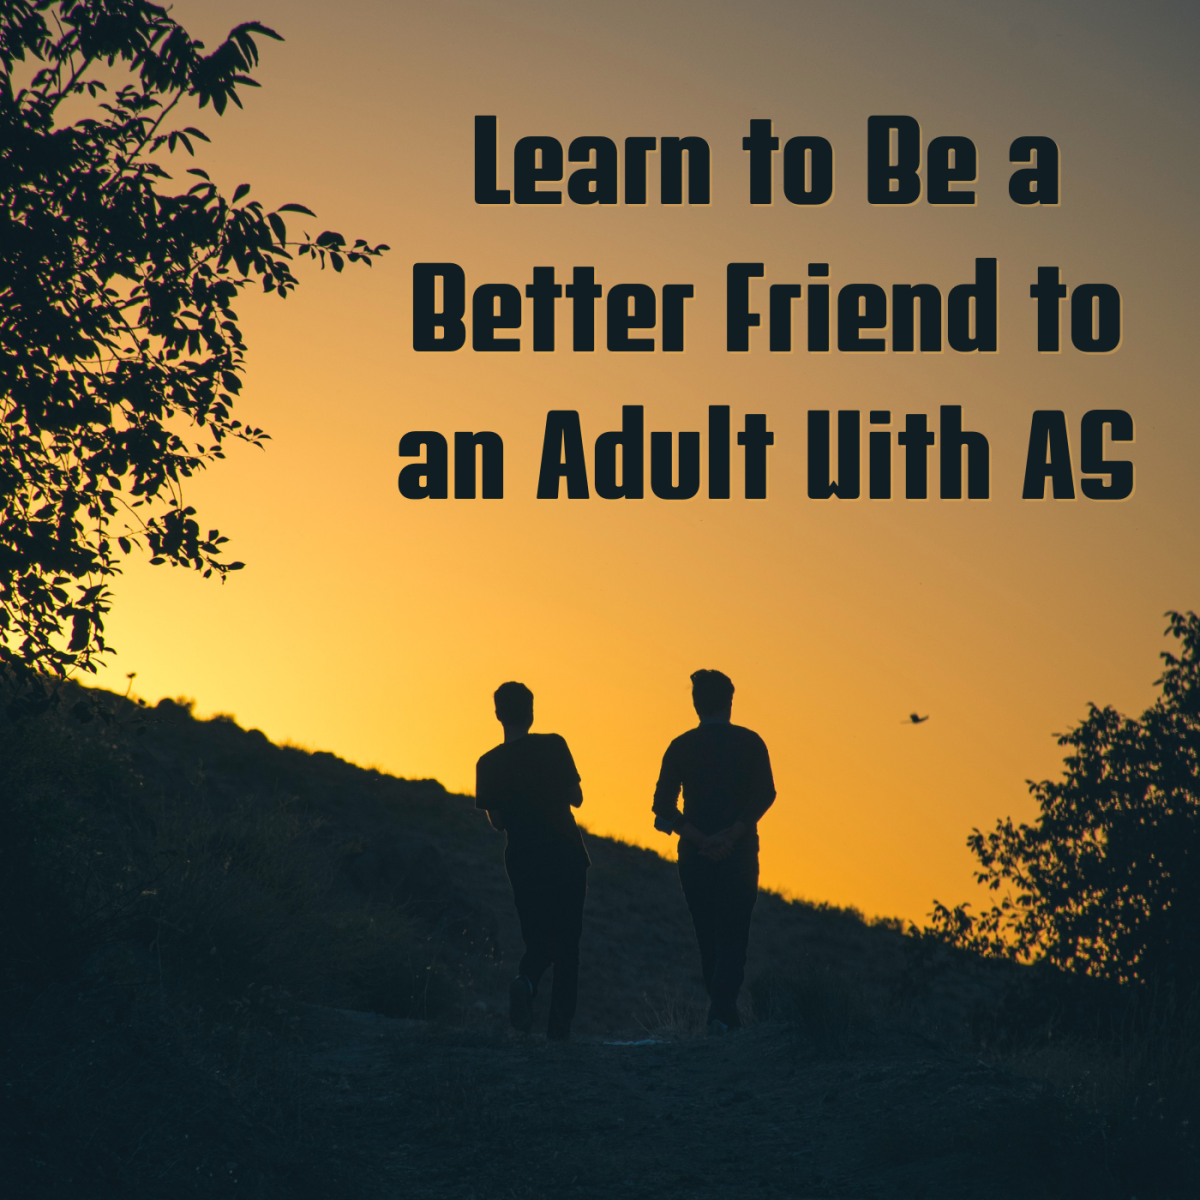 How to Be a Better Friend to an Adult With Aspergers Syndrome (High-Functioning Autism)